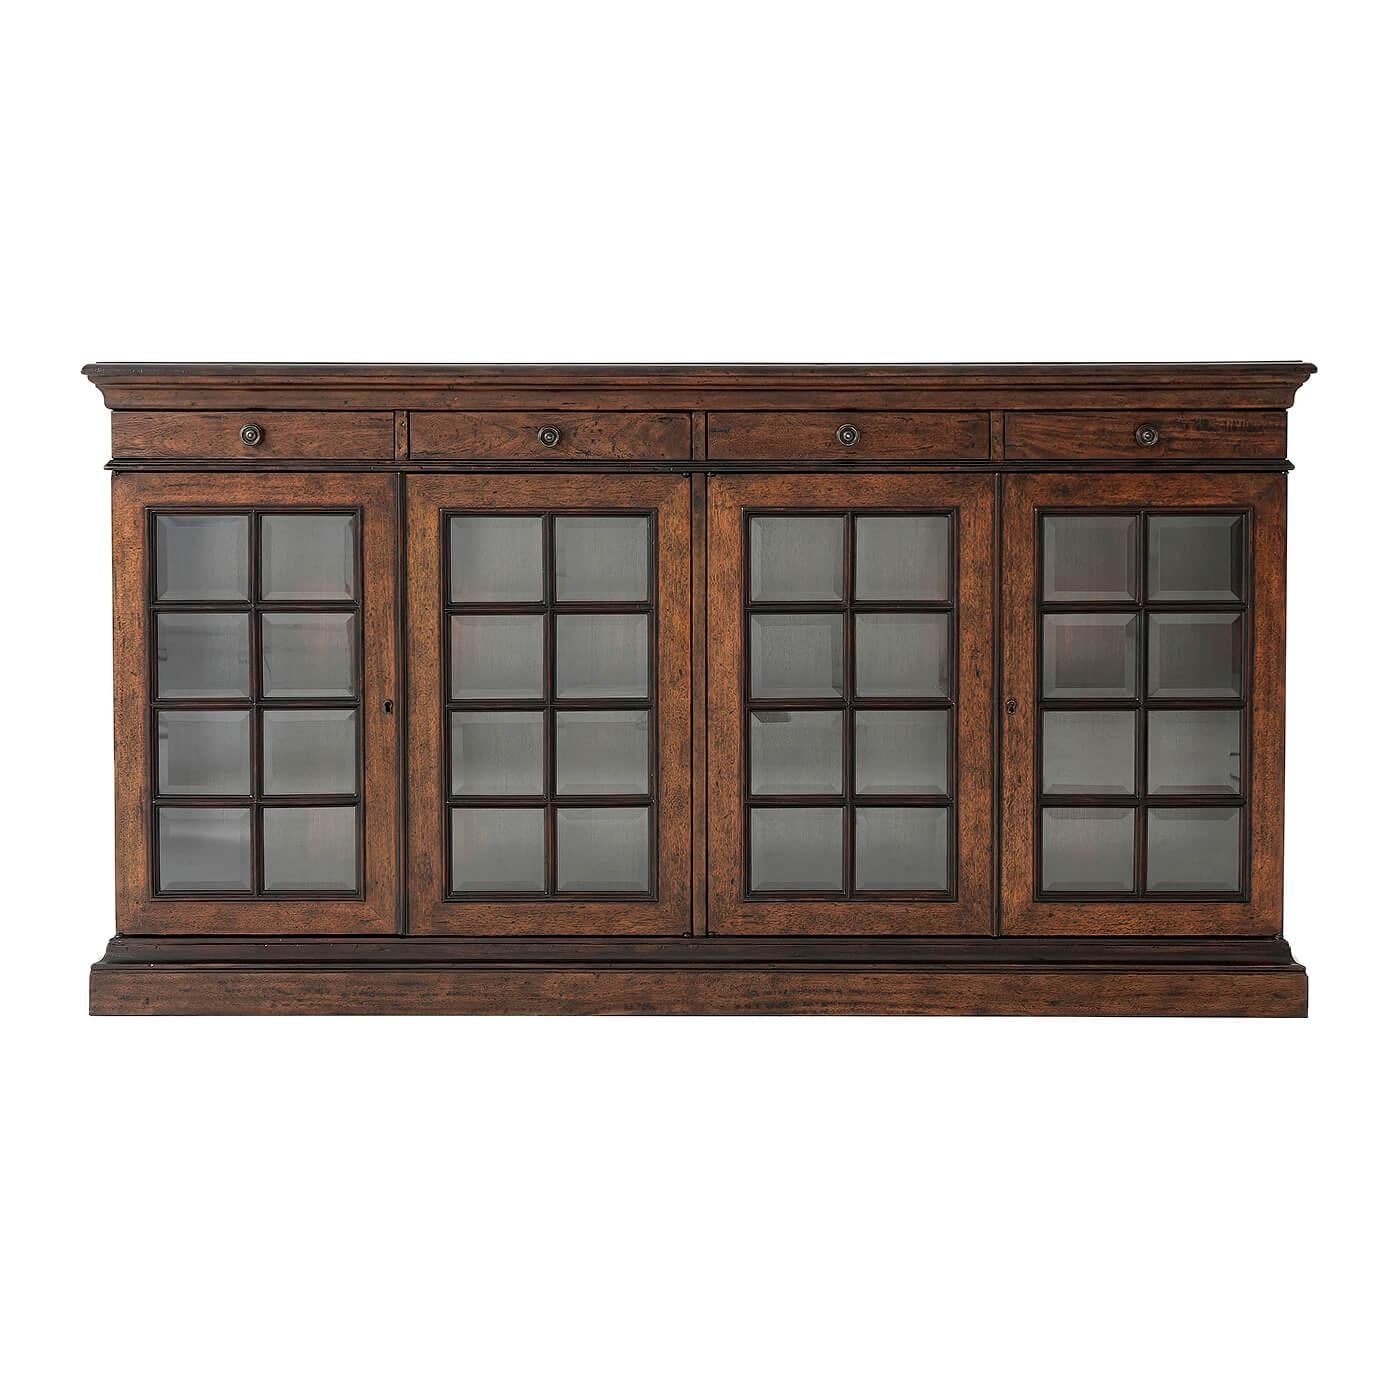 French provincial buffet cabinet with a molded edge rectangular parquetry top and four frieze drawers, above cabinet doors with beveled glass panels. The interior two sections with fixed shelves and raised on a plinth base.
Dimensions: 67.25